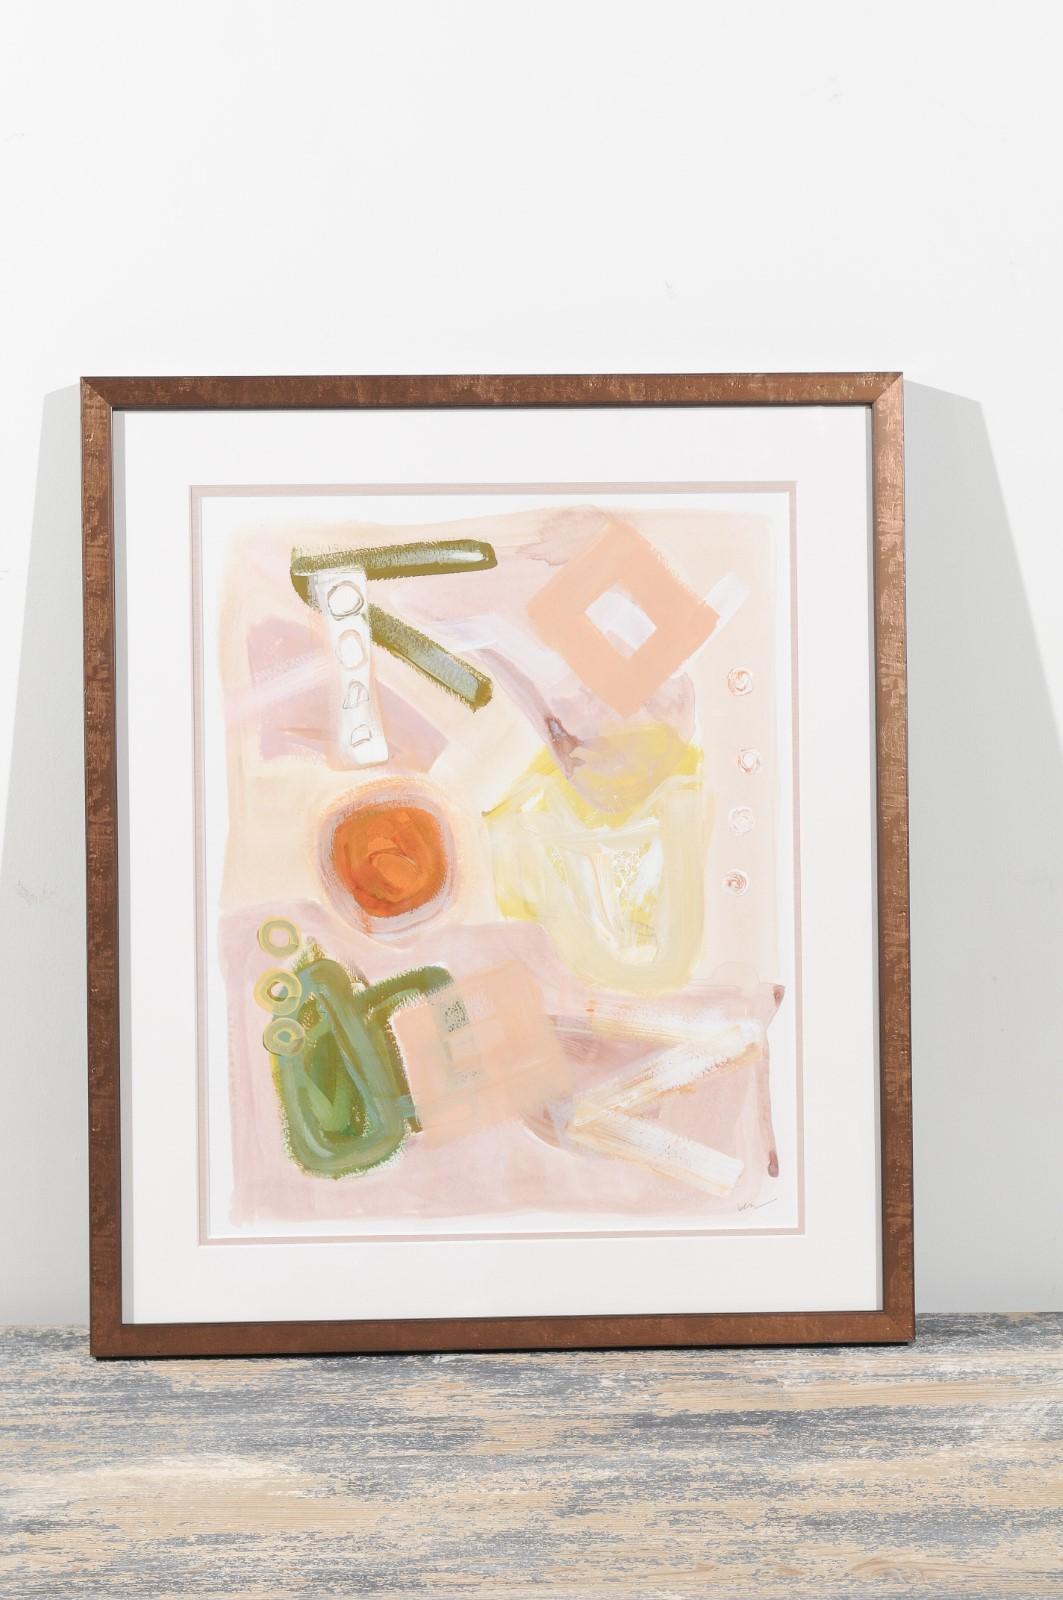 Opposites attract by Brittany McGraw. Measures: 16 x 20 acrylic abstract. Original painting on cold pressed watercolor paper. Linen double-mat framing. Soft spring palette with playful, muted geometric shapes.